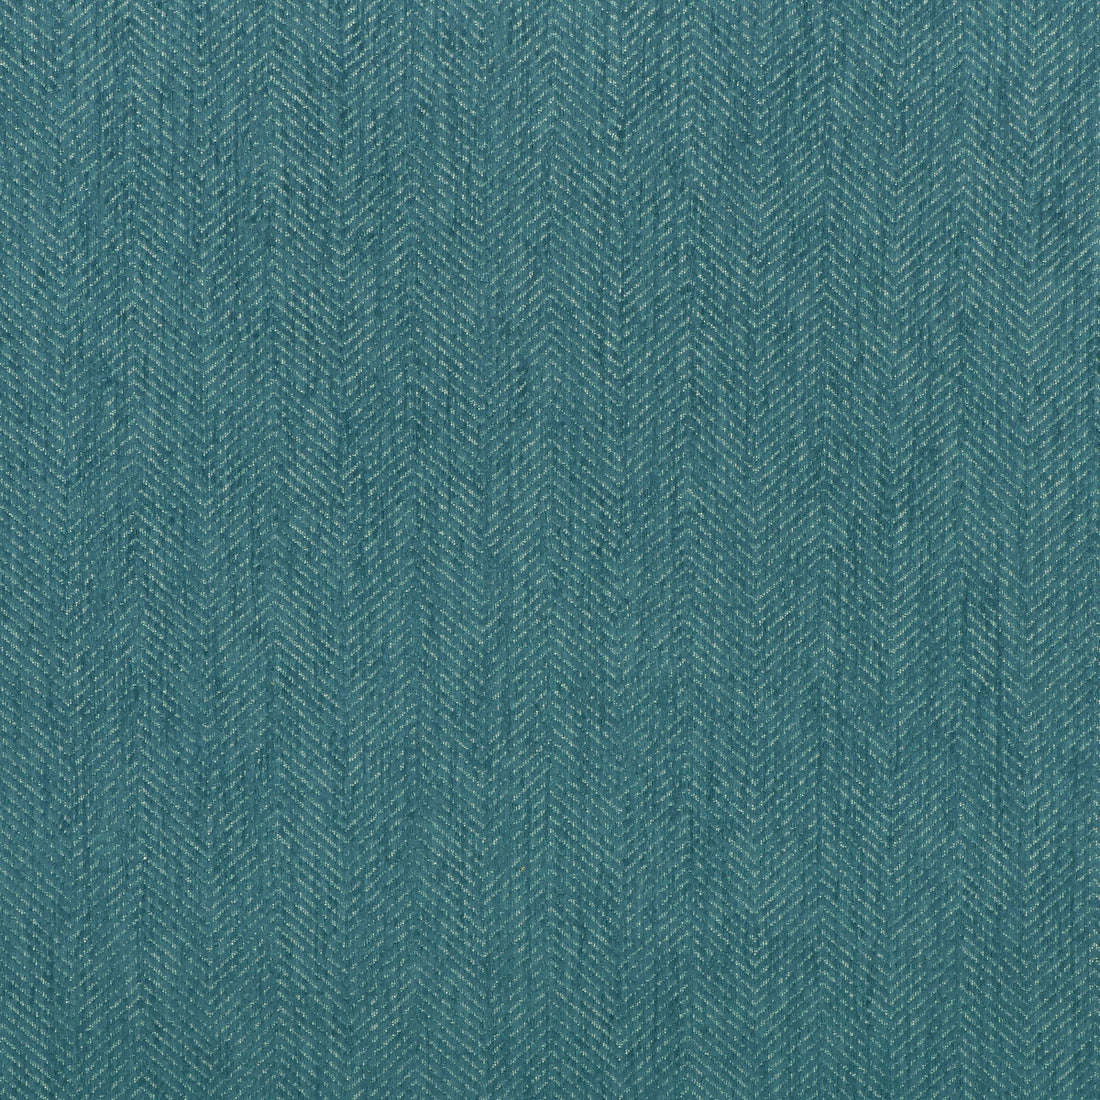 Kravet Smart fabric in 35361-313 color - pattern 35361.313.0 - by Kravet Smart in the Inside Out Performance Fabrics collection